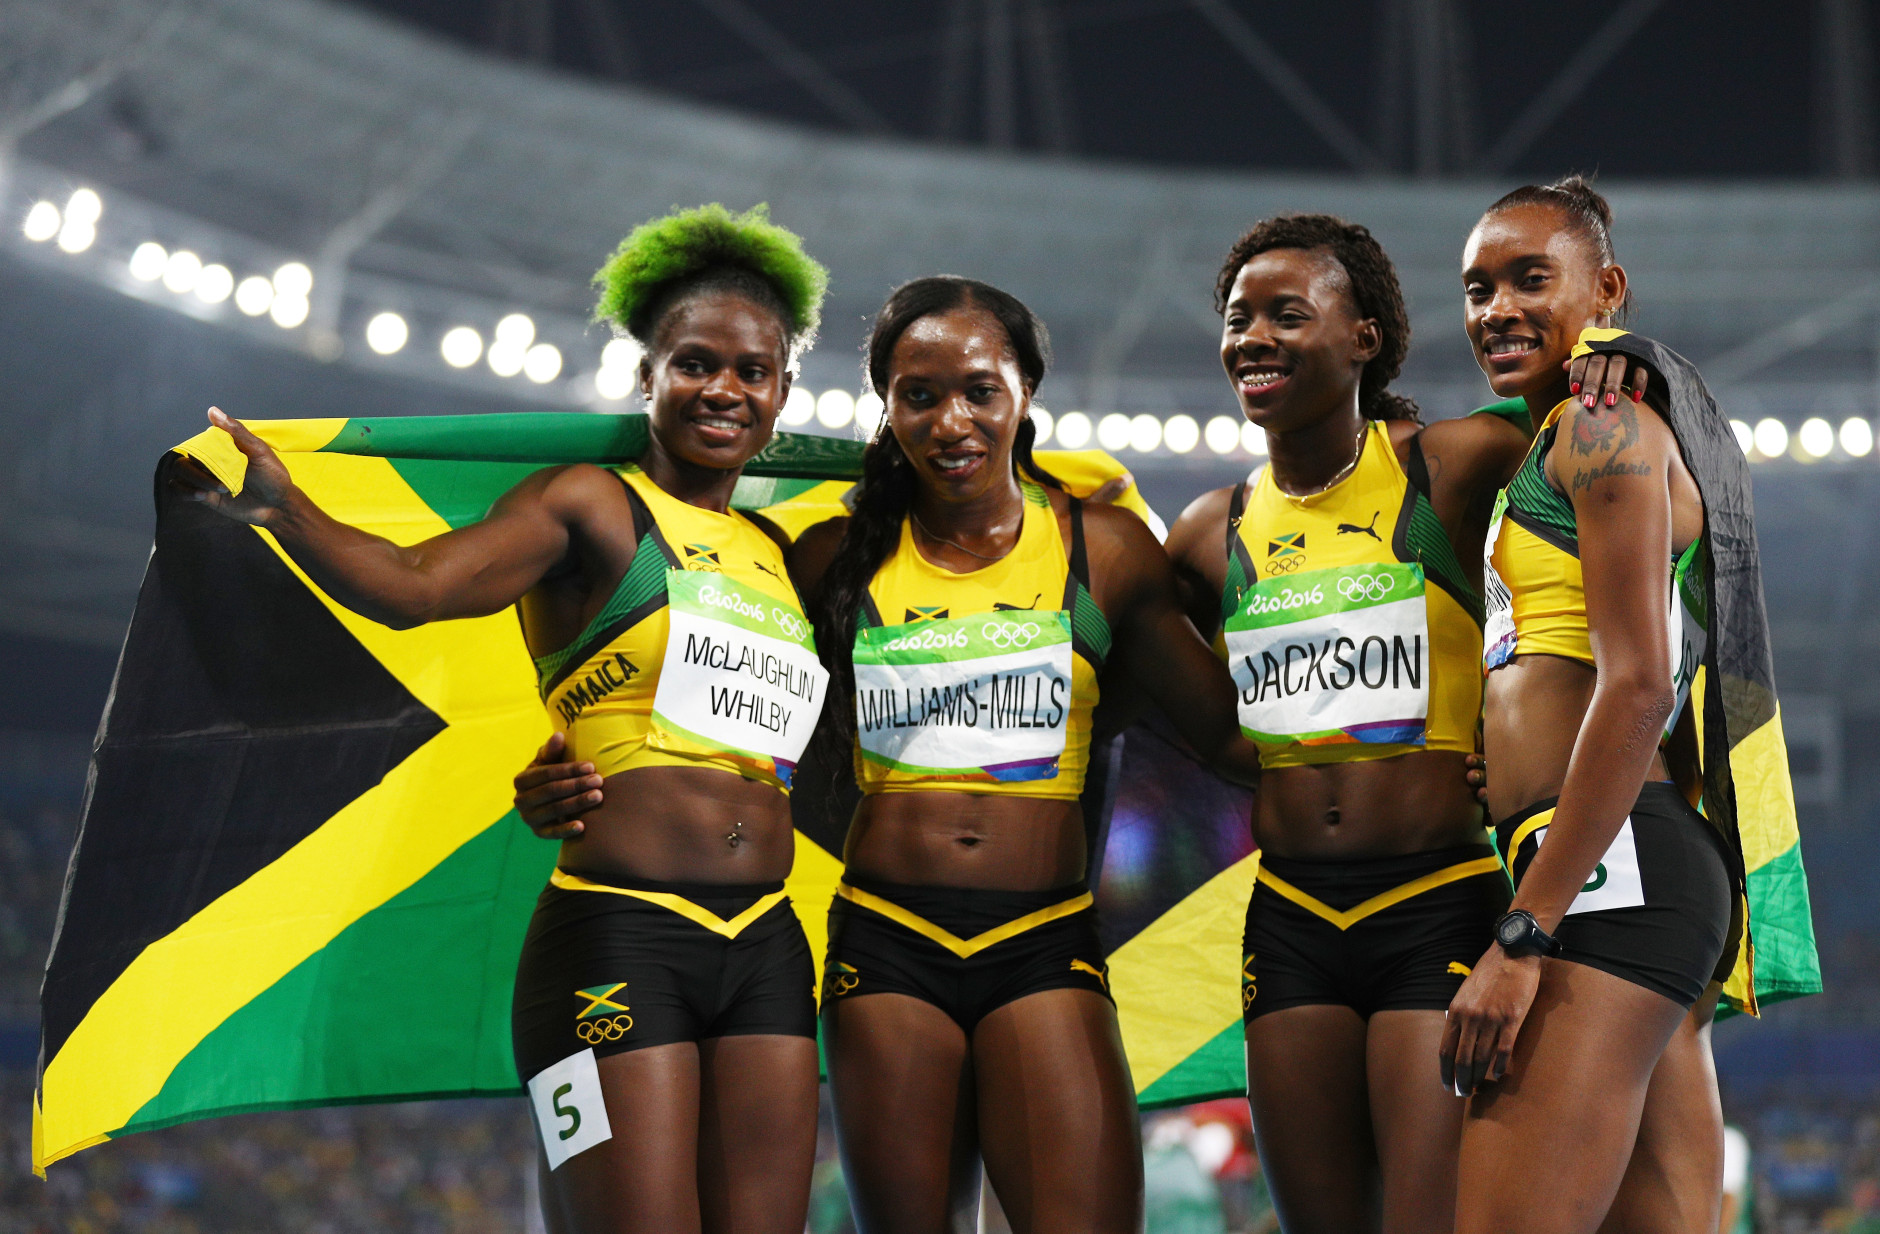 RIO DE JANEIRO, BRAZIL - AUGUST 20:  (L-R) Anneisha McLaughlin-Whilby, Novlene Williams-Mills, Shericka Jackson and Stephenie Ann Mcpherson of Jamaica react after winning silver in the Women's 4 x 400 meter Relay on Day 15 of the Rio 2016 Olympic Games at the Olympic Stadium on August 20, 2016 in Rio de Janeiro, Brazil.  (Photo by Ian Walton/Getty Images)